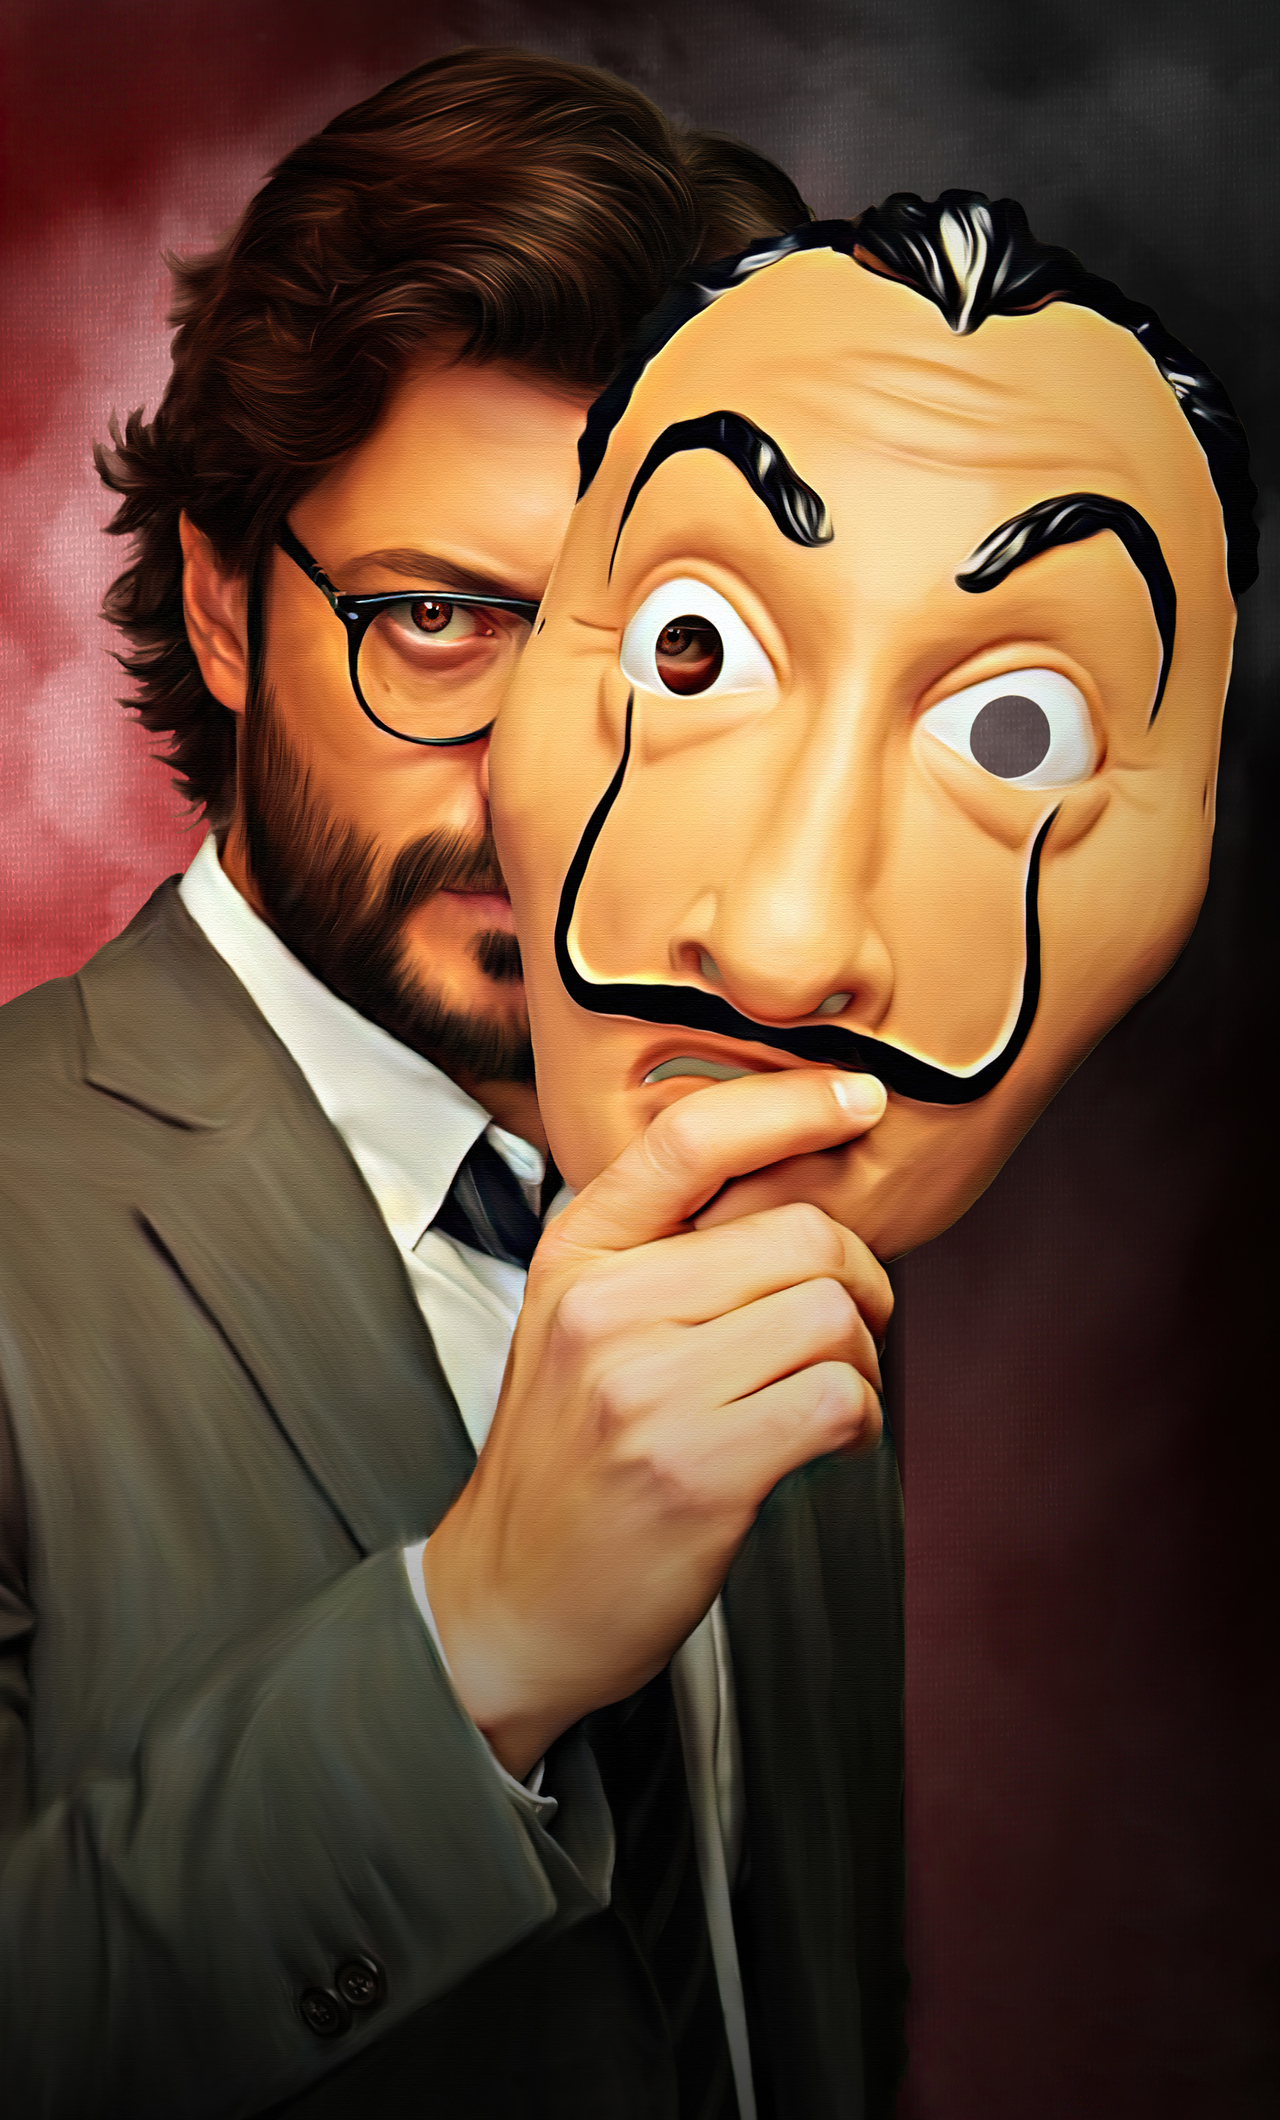 X the professor digital painting money heist iphone hd k wallpapers images backgrounds photos and pictures